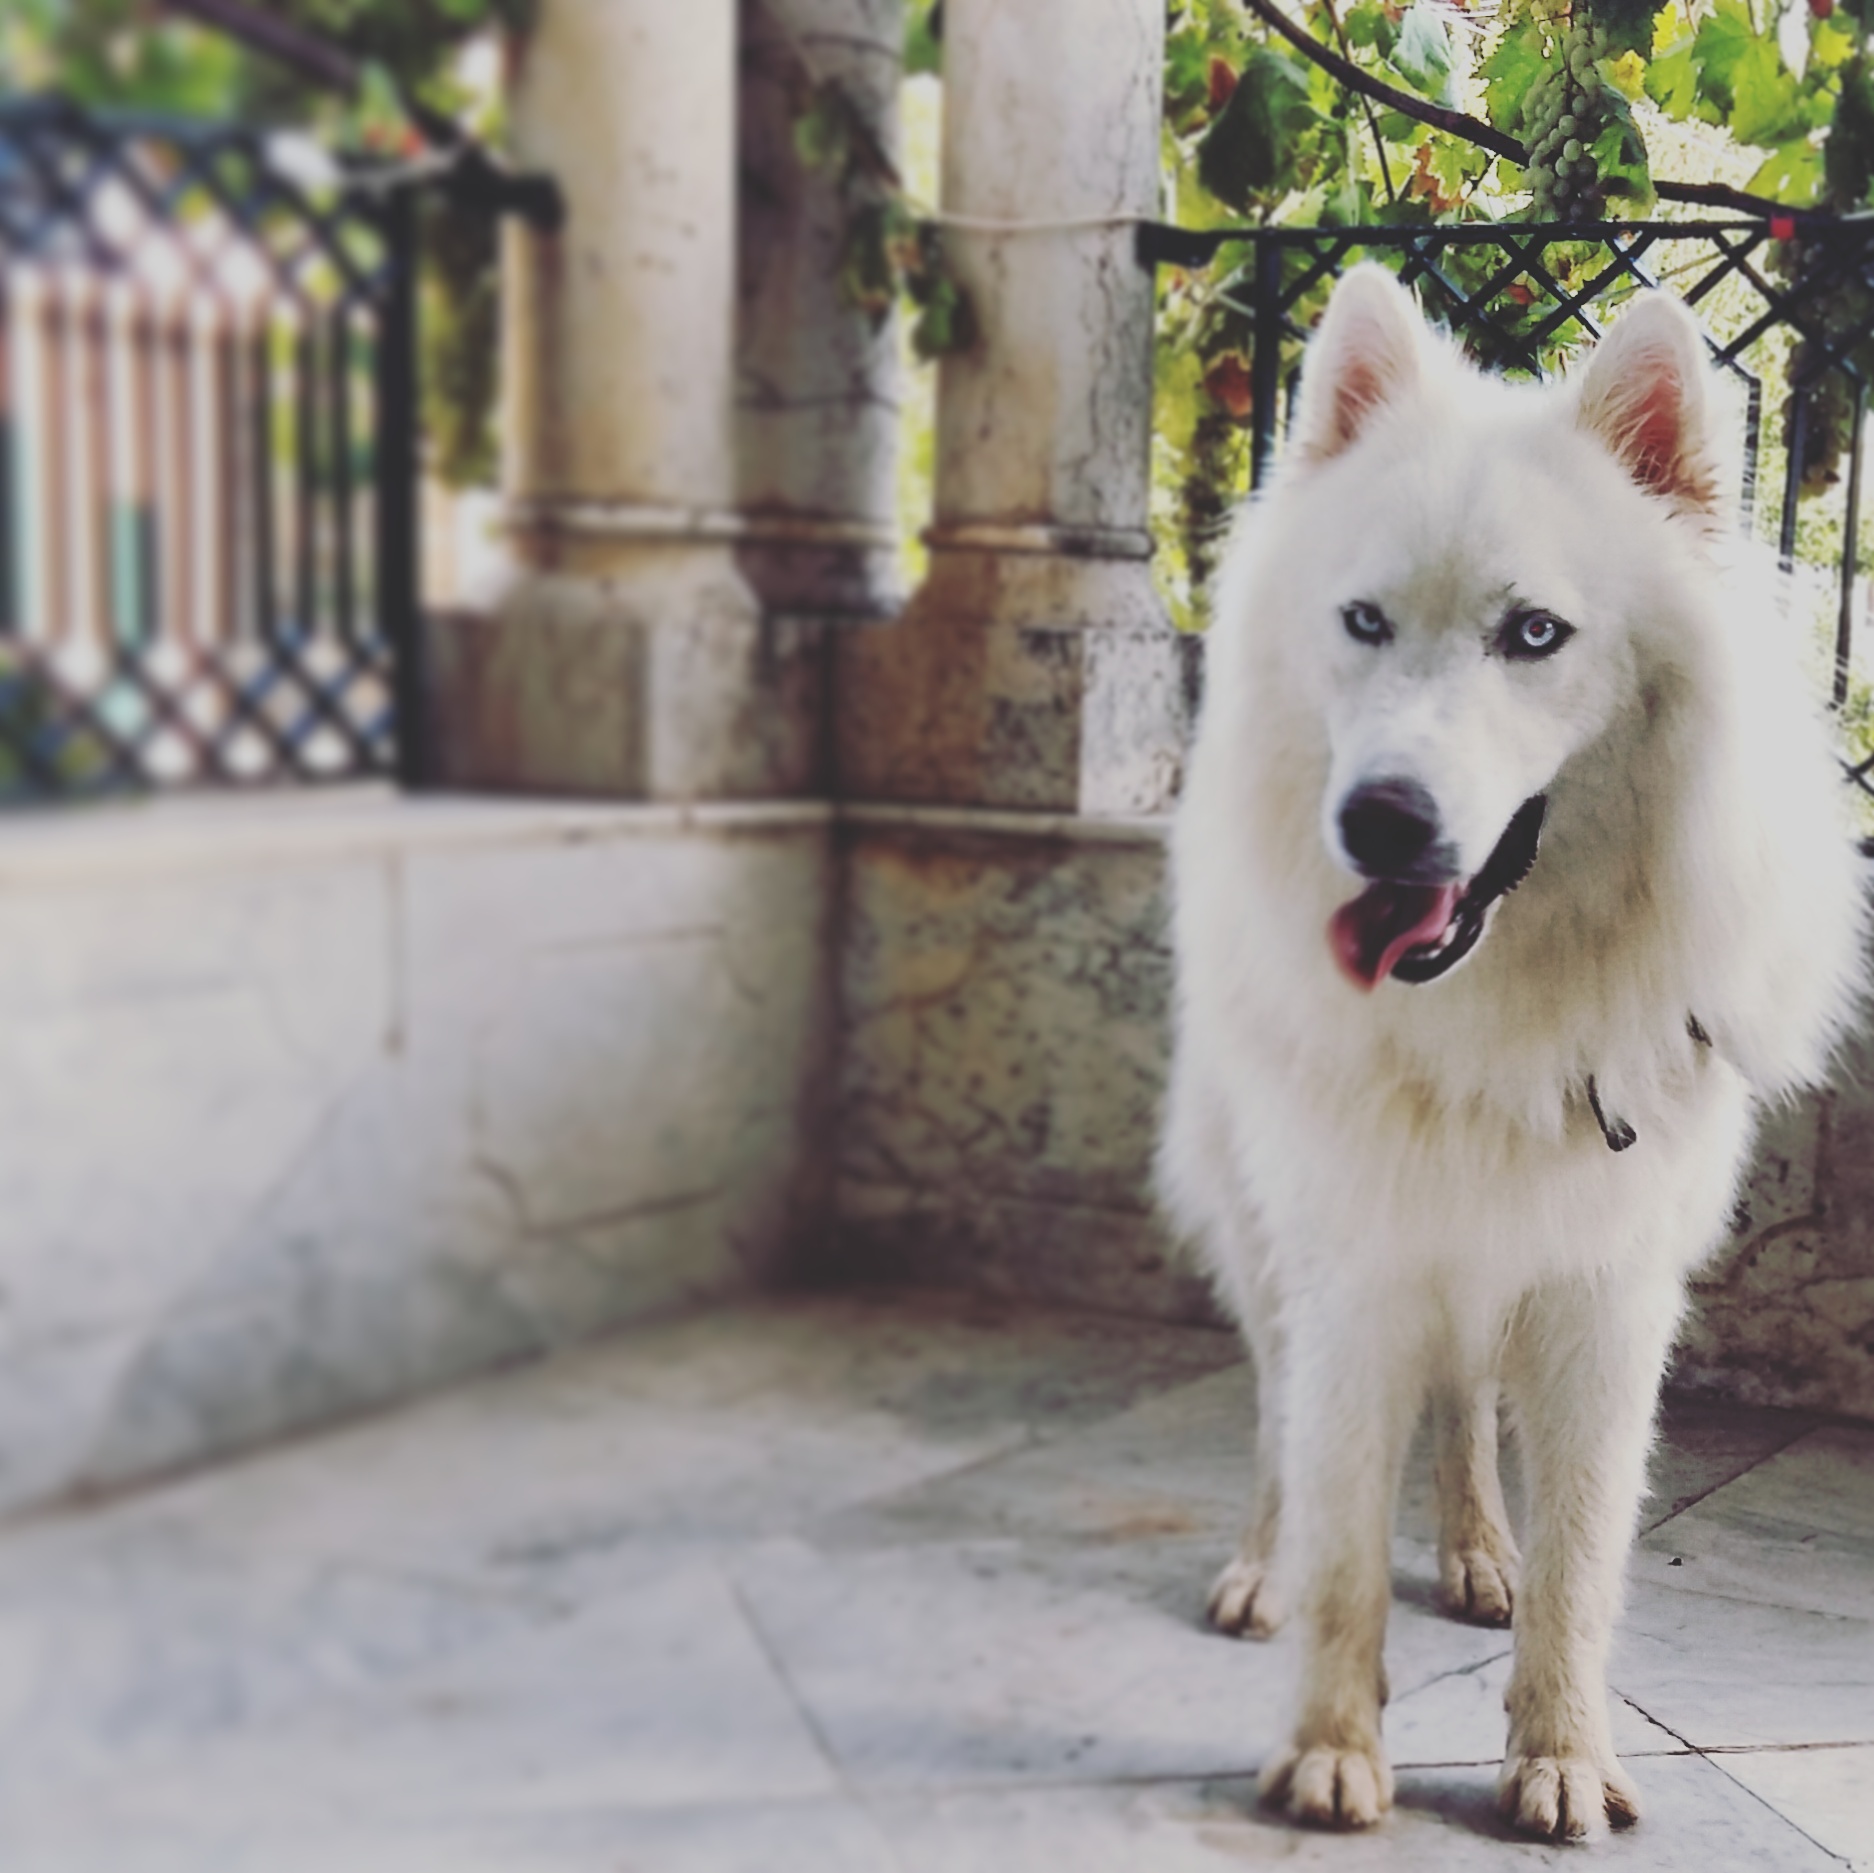 Lost & Found Dog in Lebanon: White Husky blue eyes lost!